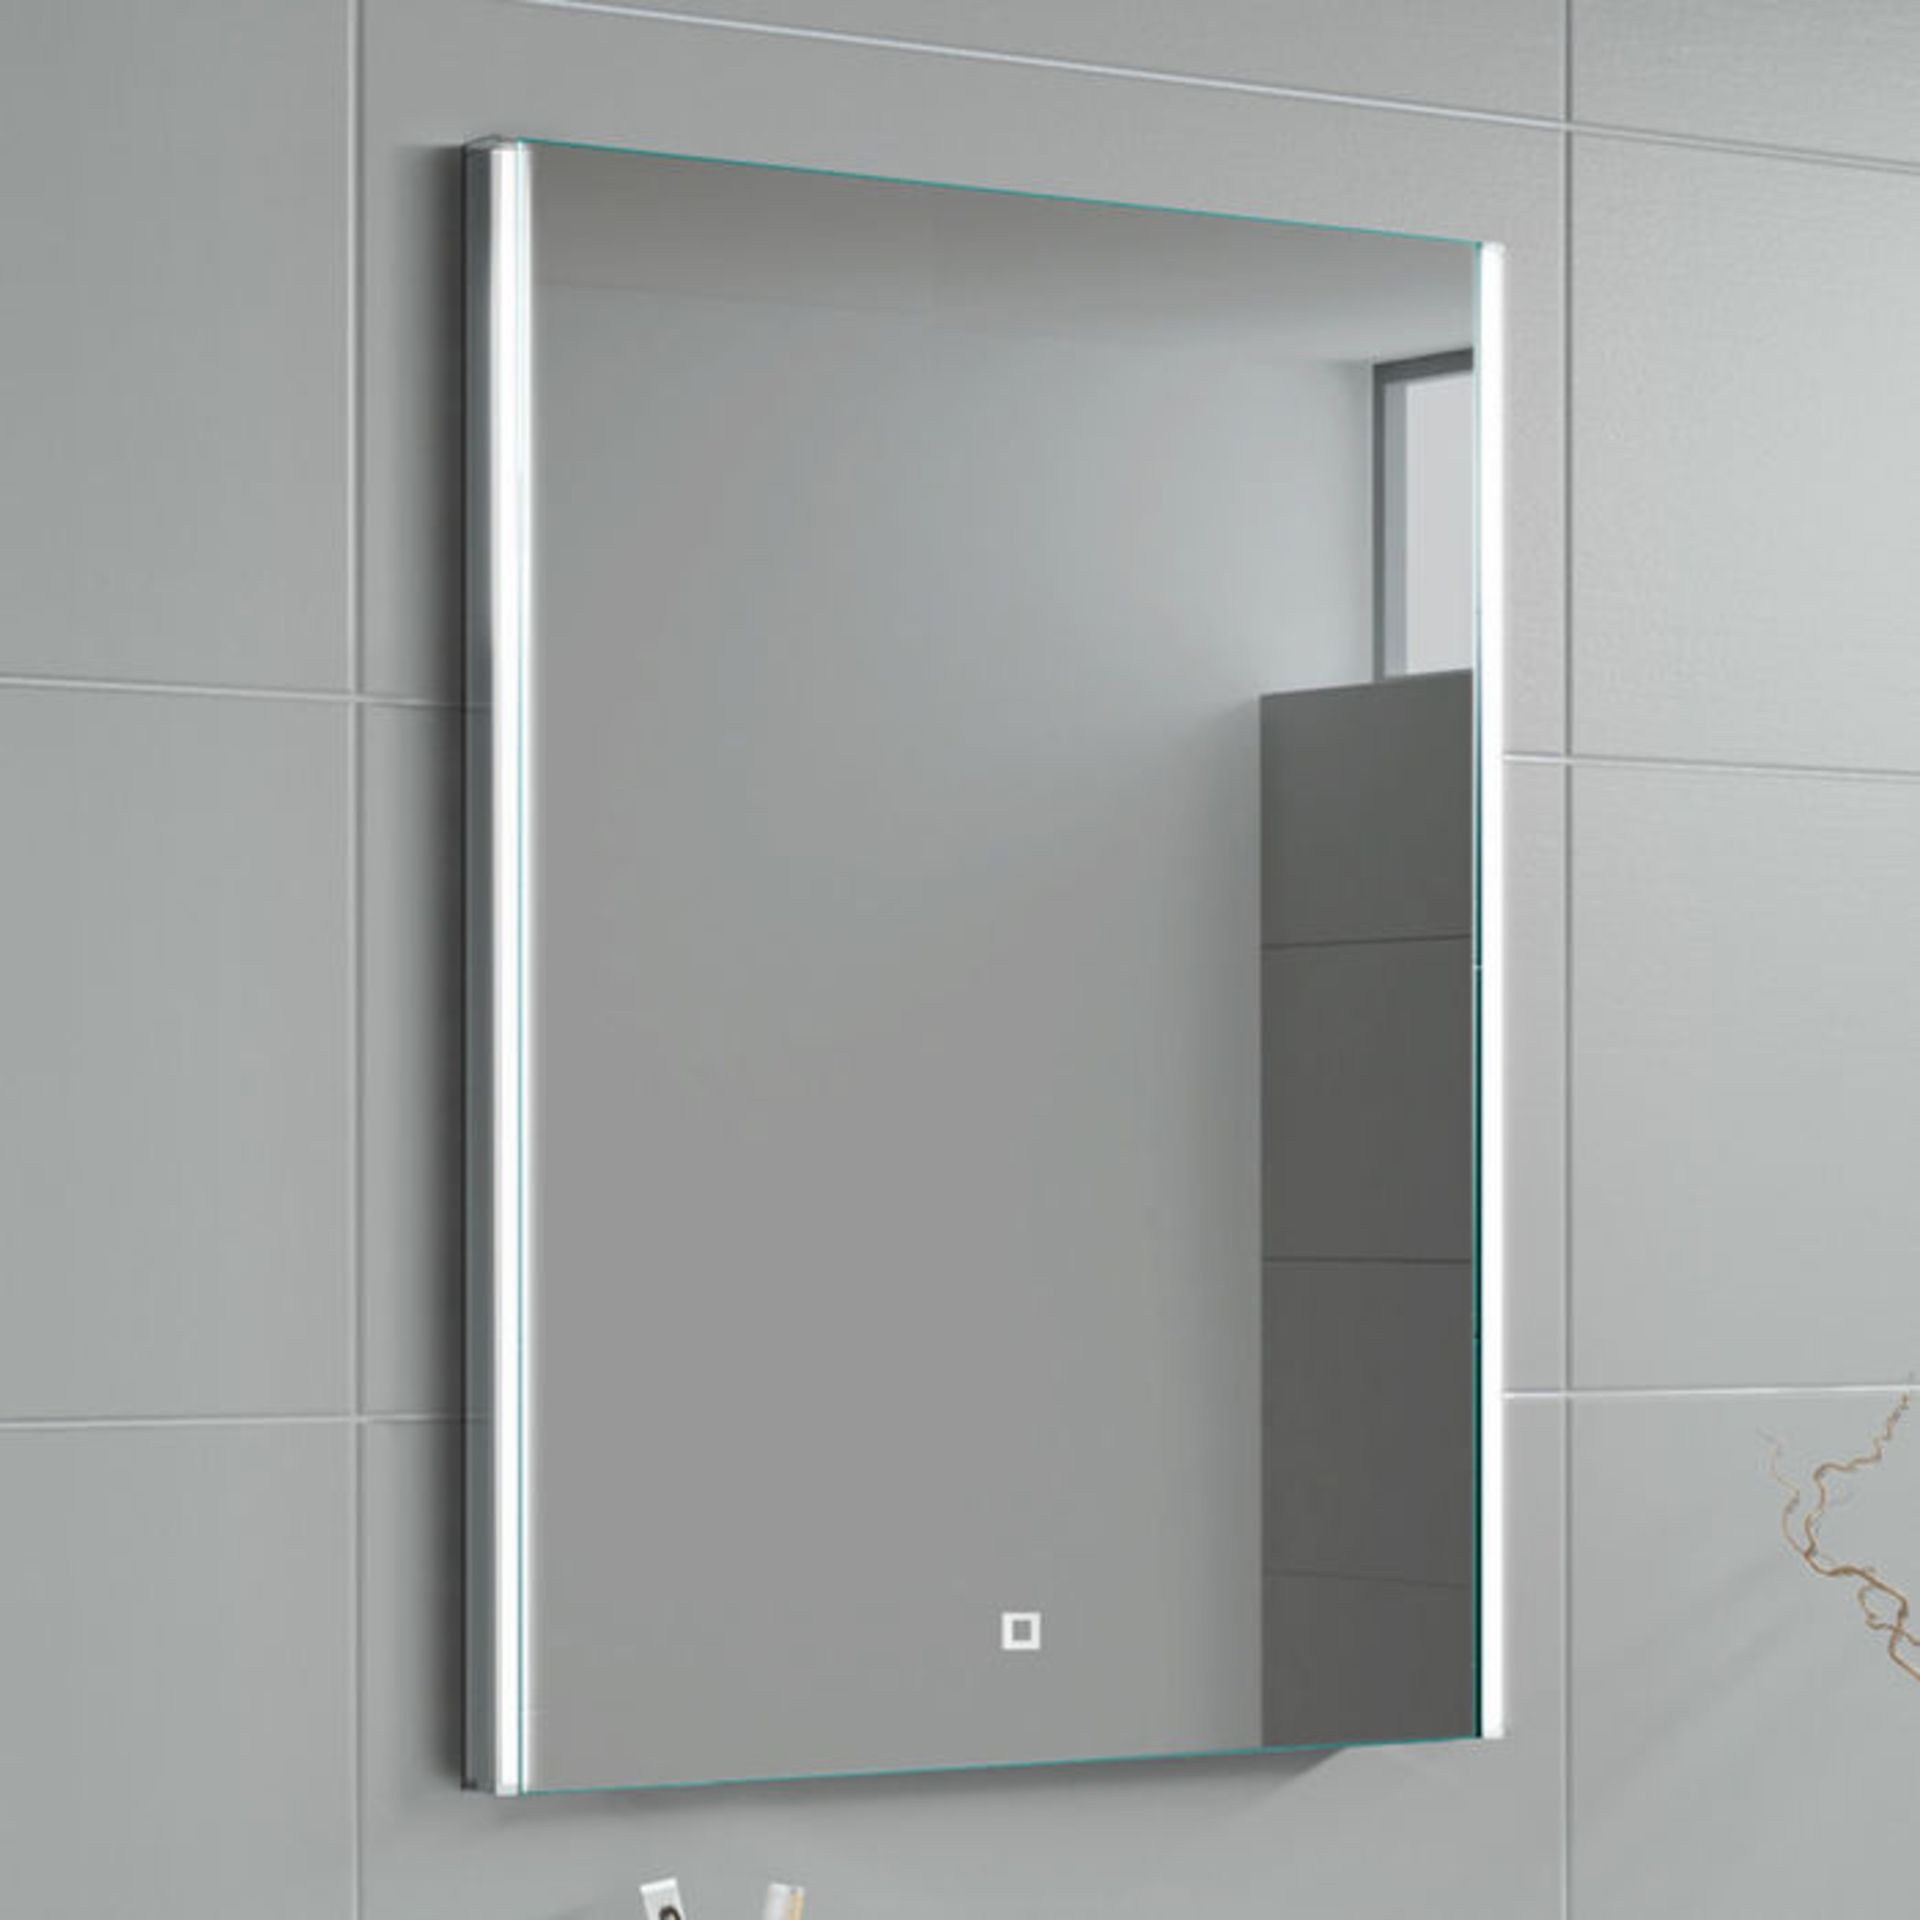 (Y205) 700x500mm Denver Illuminated LED Mirror - Switch Control. RRP £349.99. Energy efficient LED - Image 2 of 5